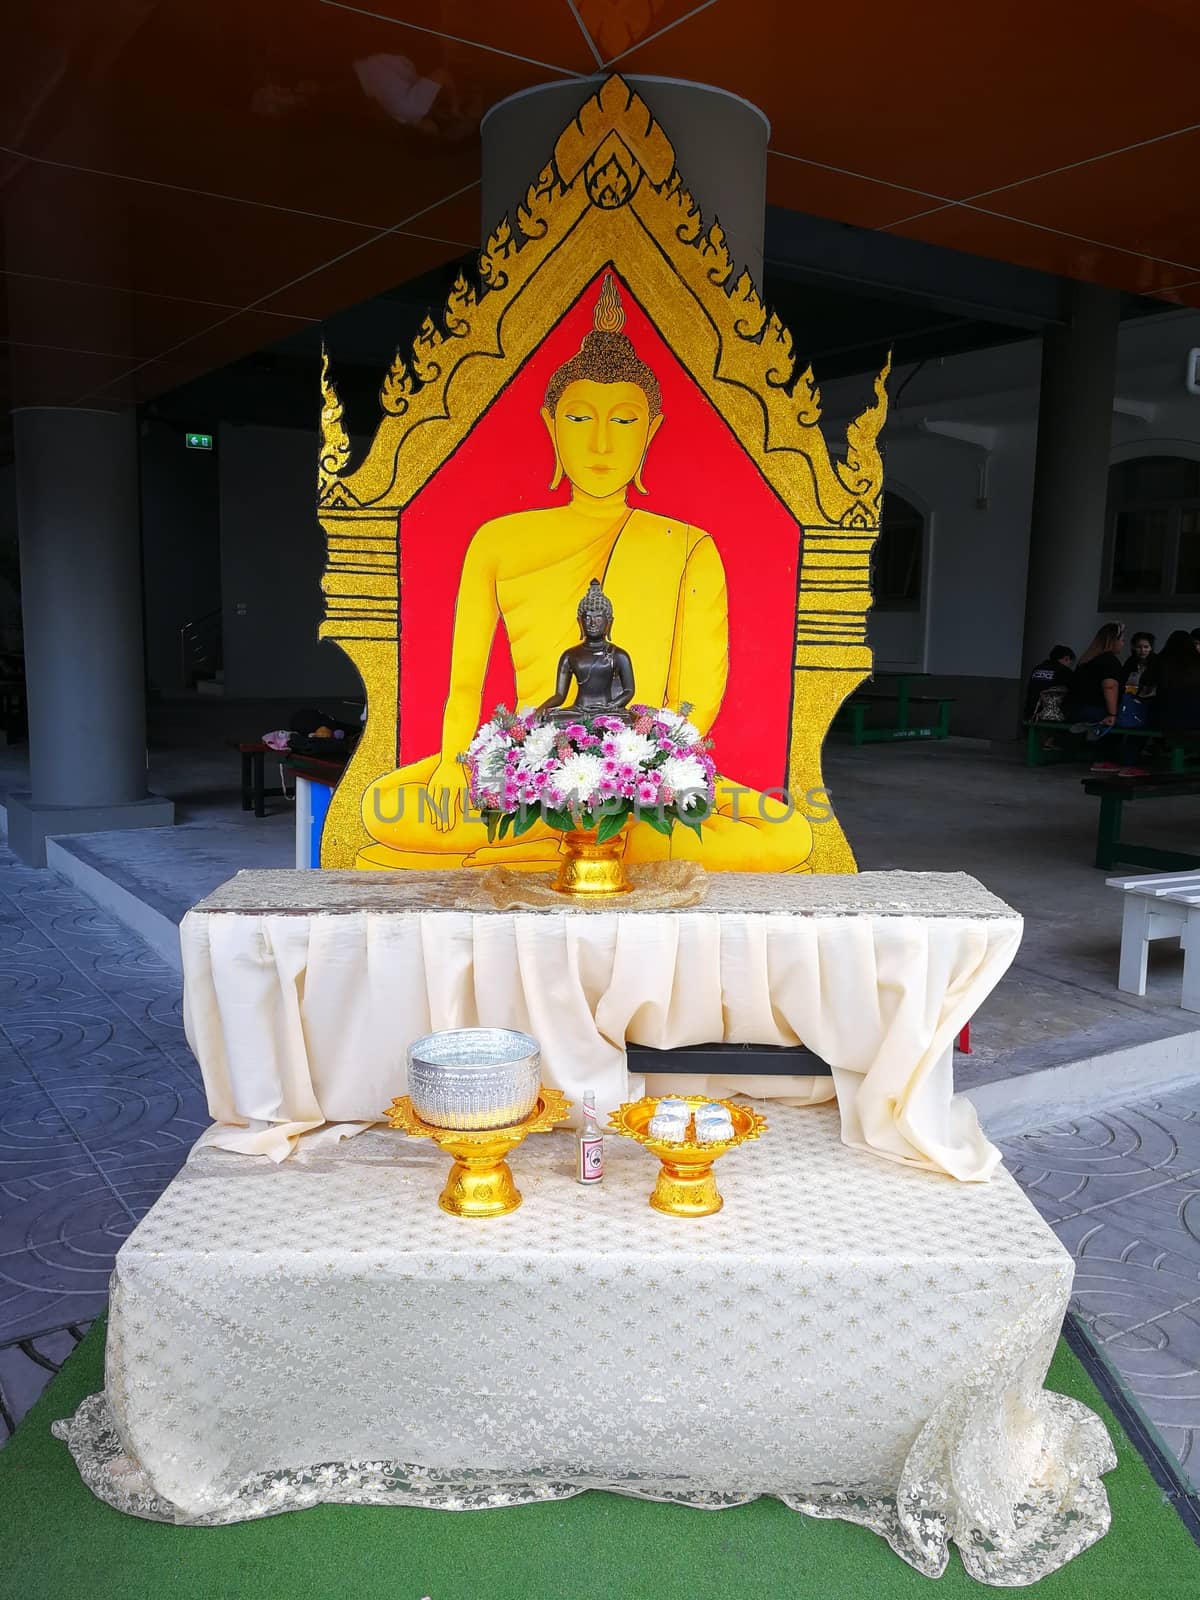 Buddha statue in Thailand temple by shatchaya